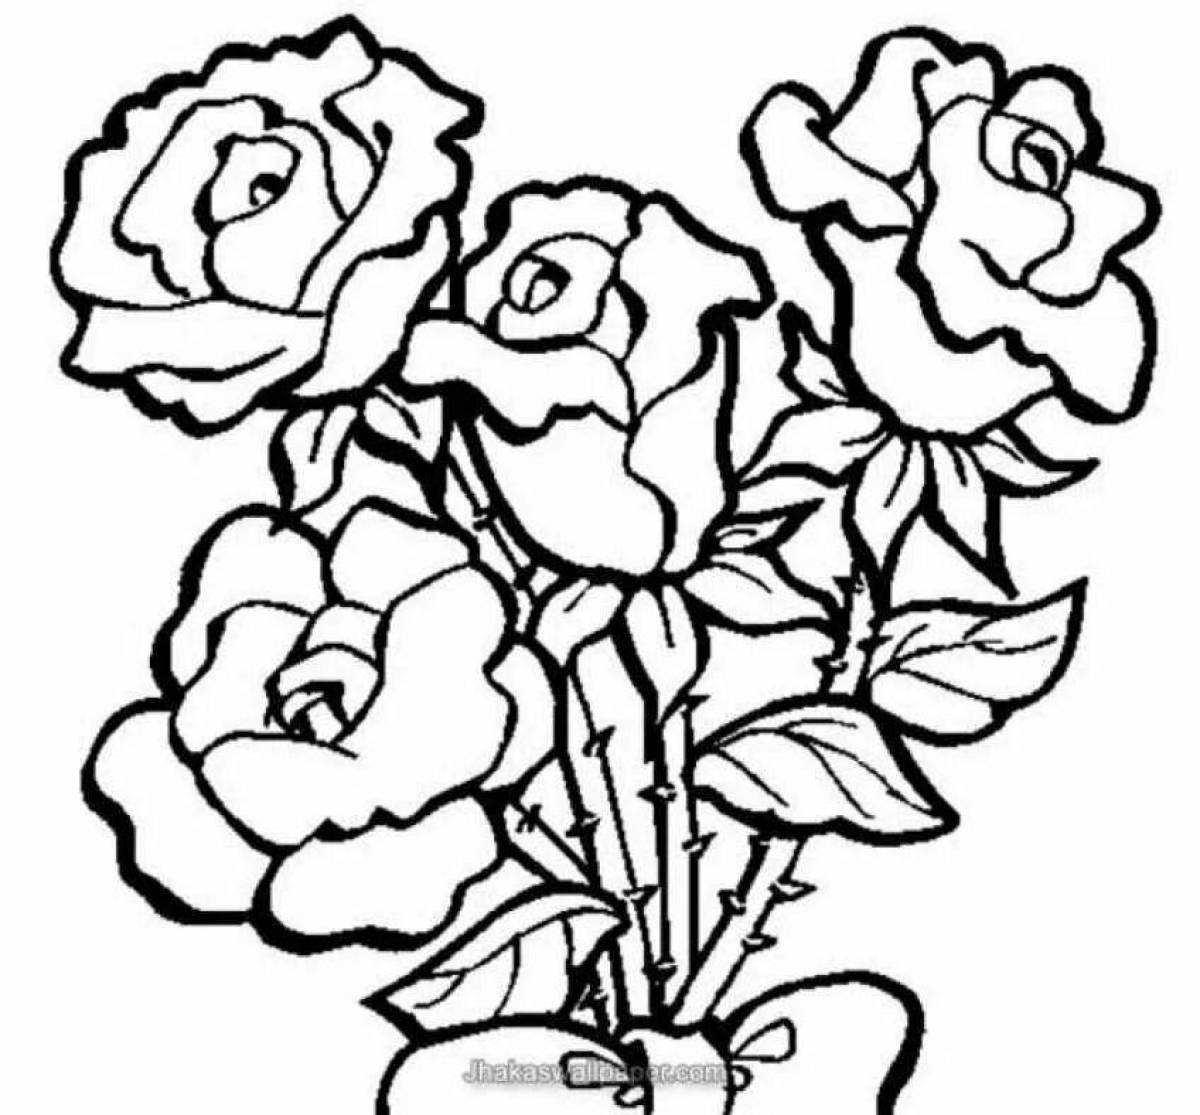 Coloring page graceful rose